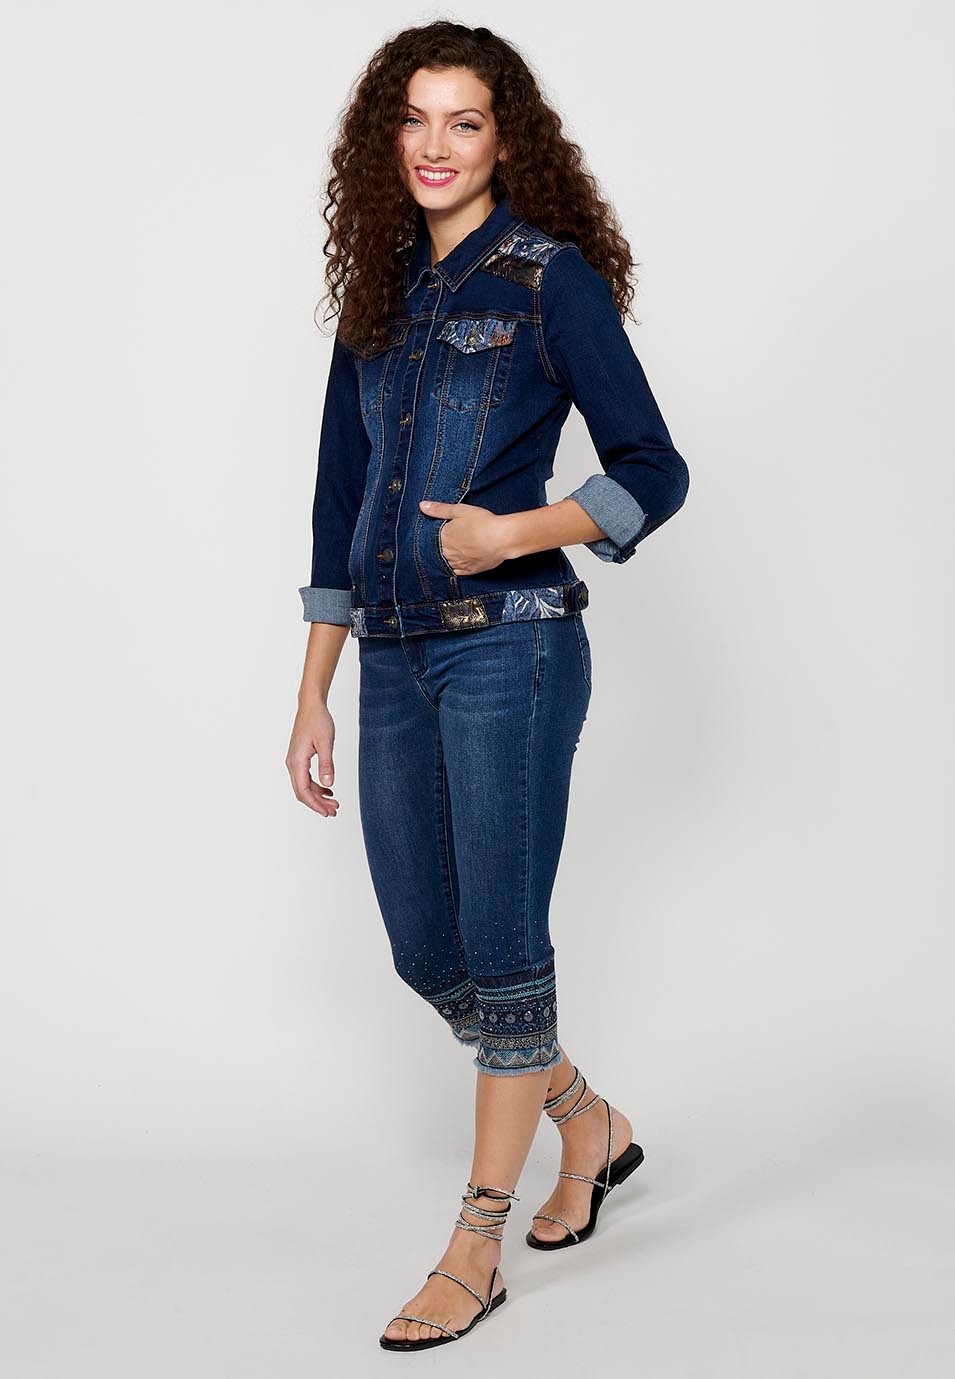 Dark Blue Long Sleeve Denim Jacket with Button Front Closure and Pockets with Embroidery on the Shoulders for Women 2